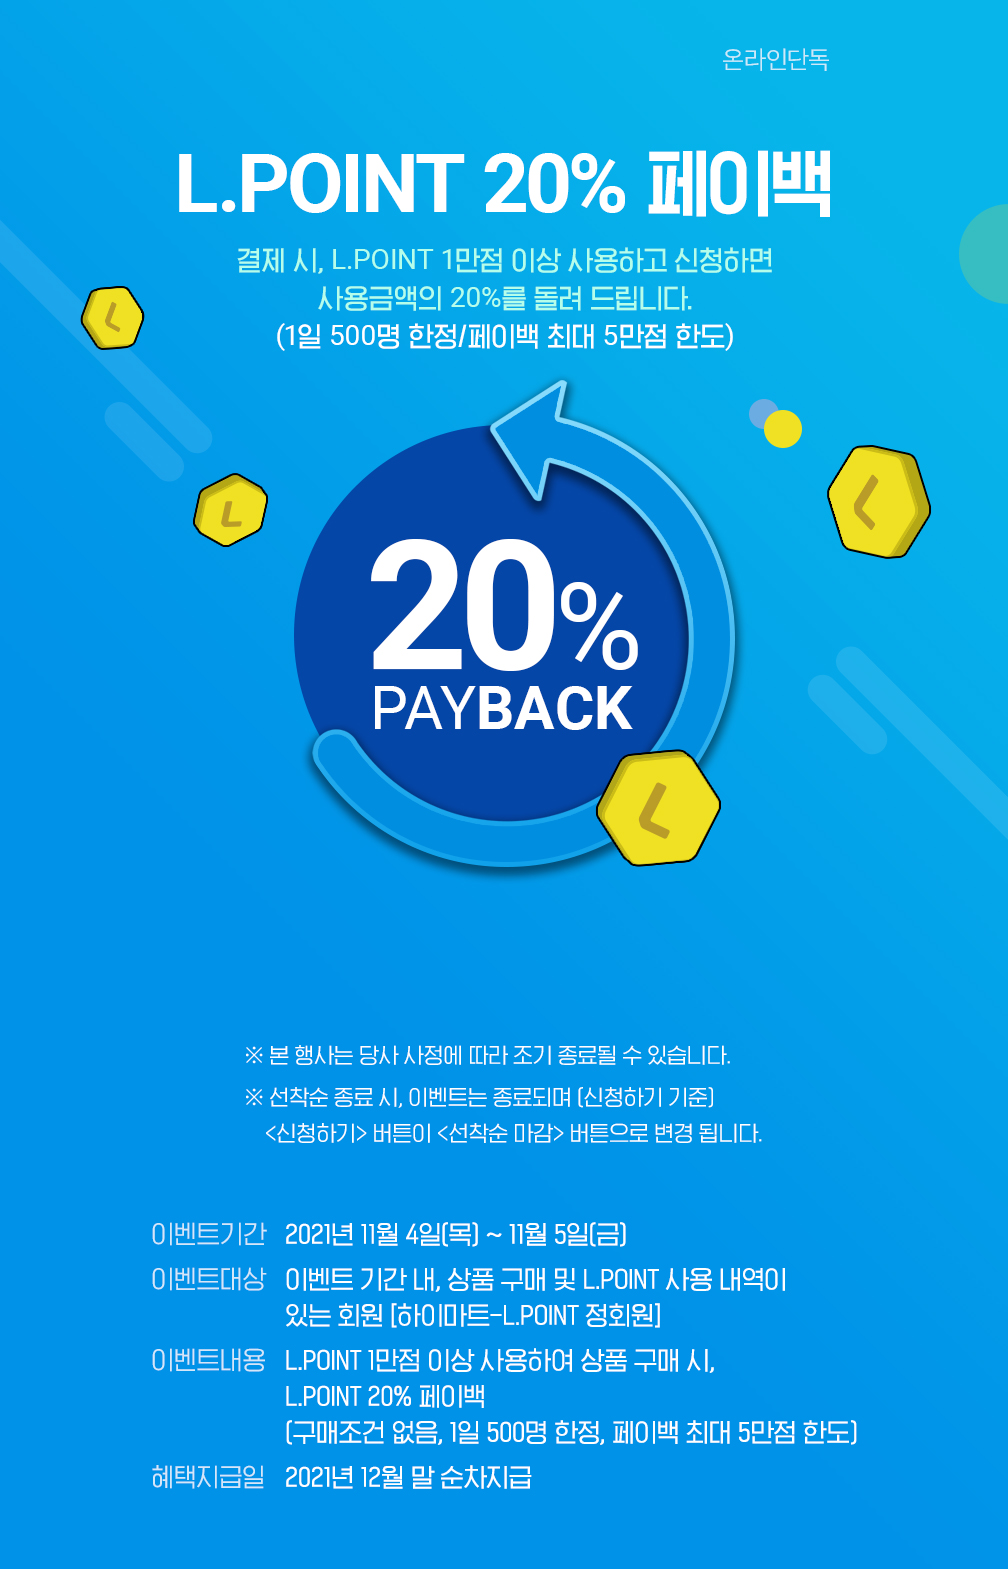 L.POINT 20% 페이백